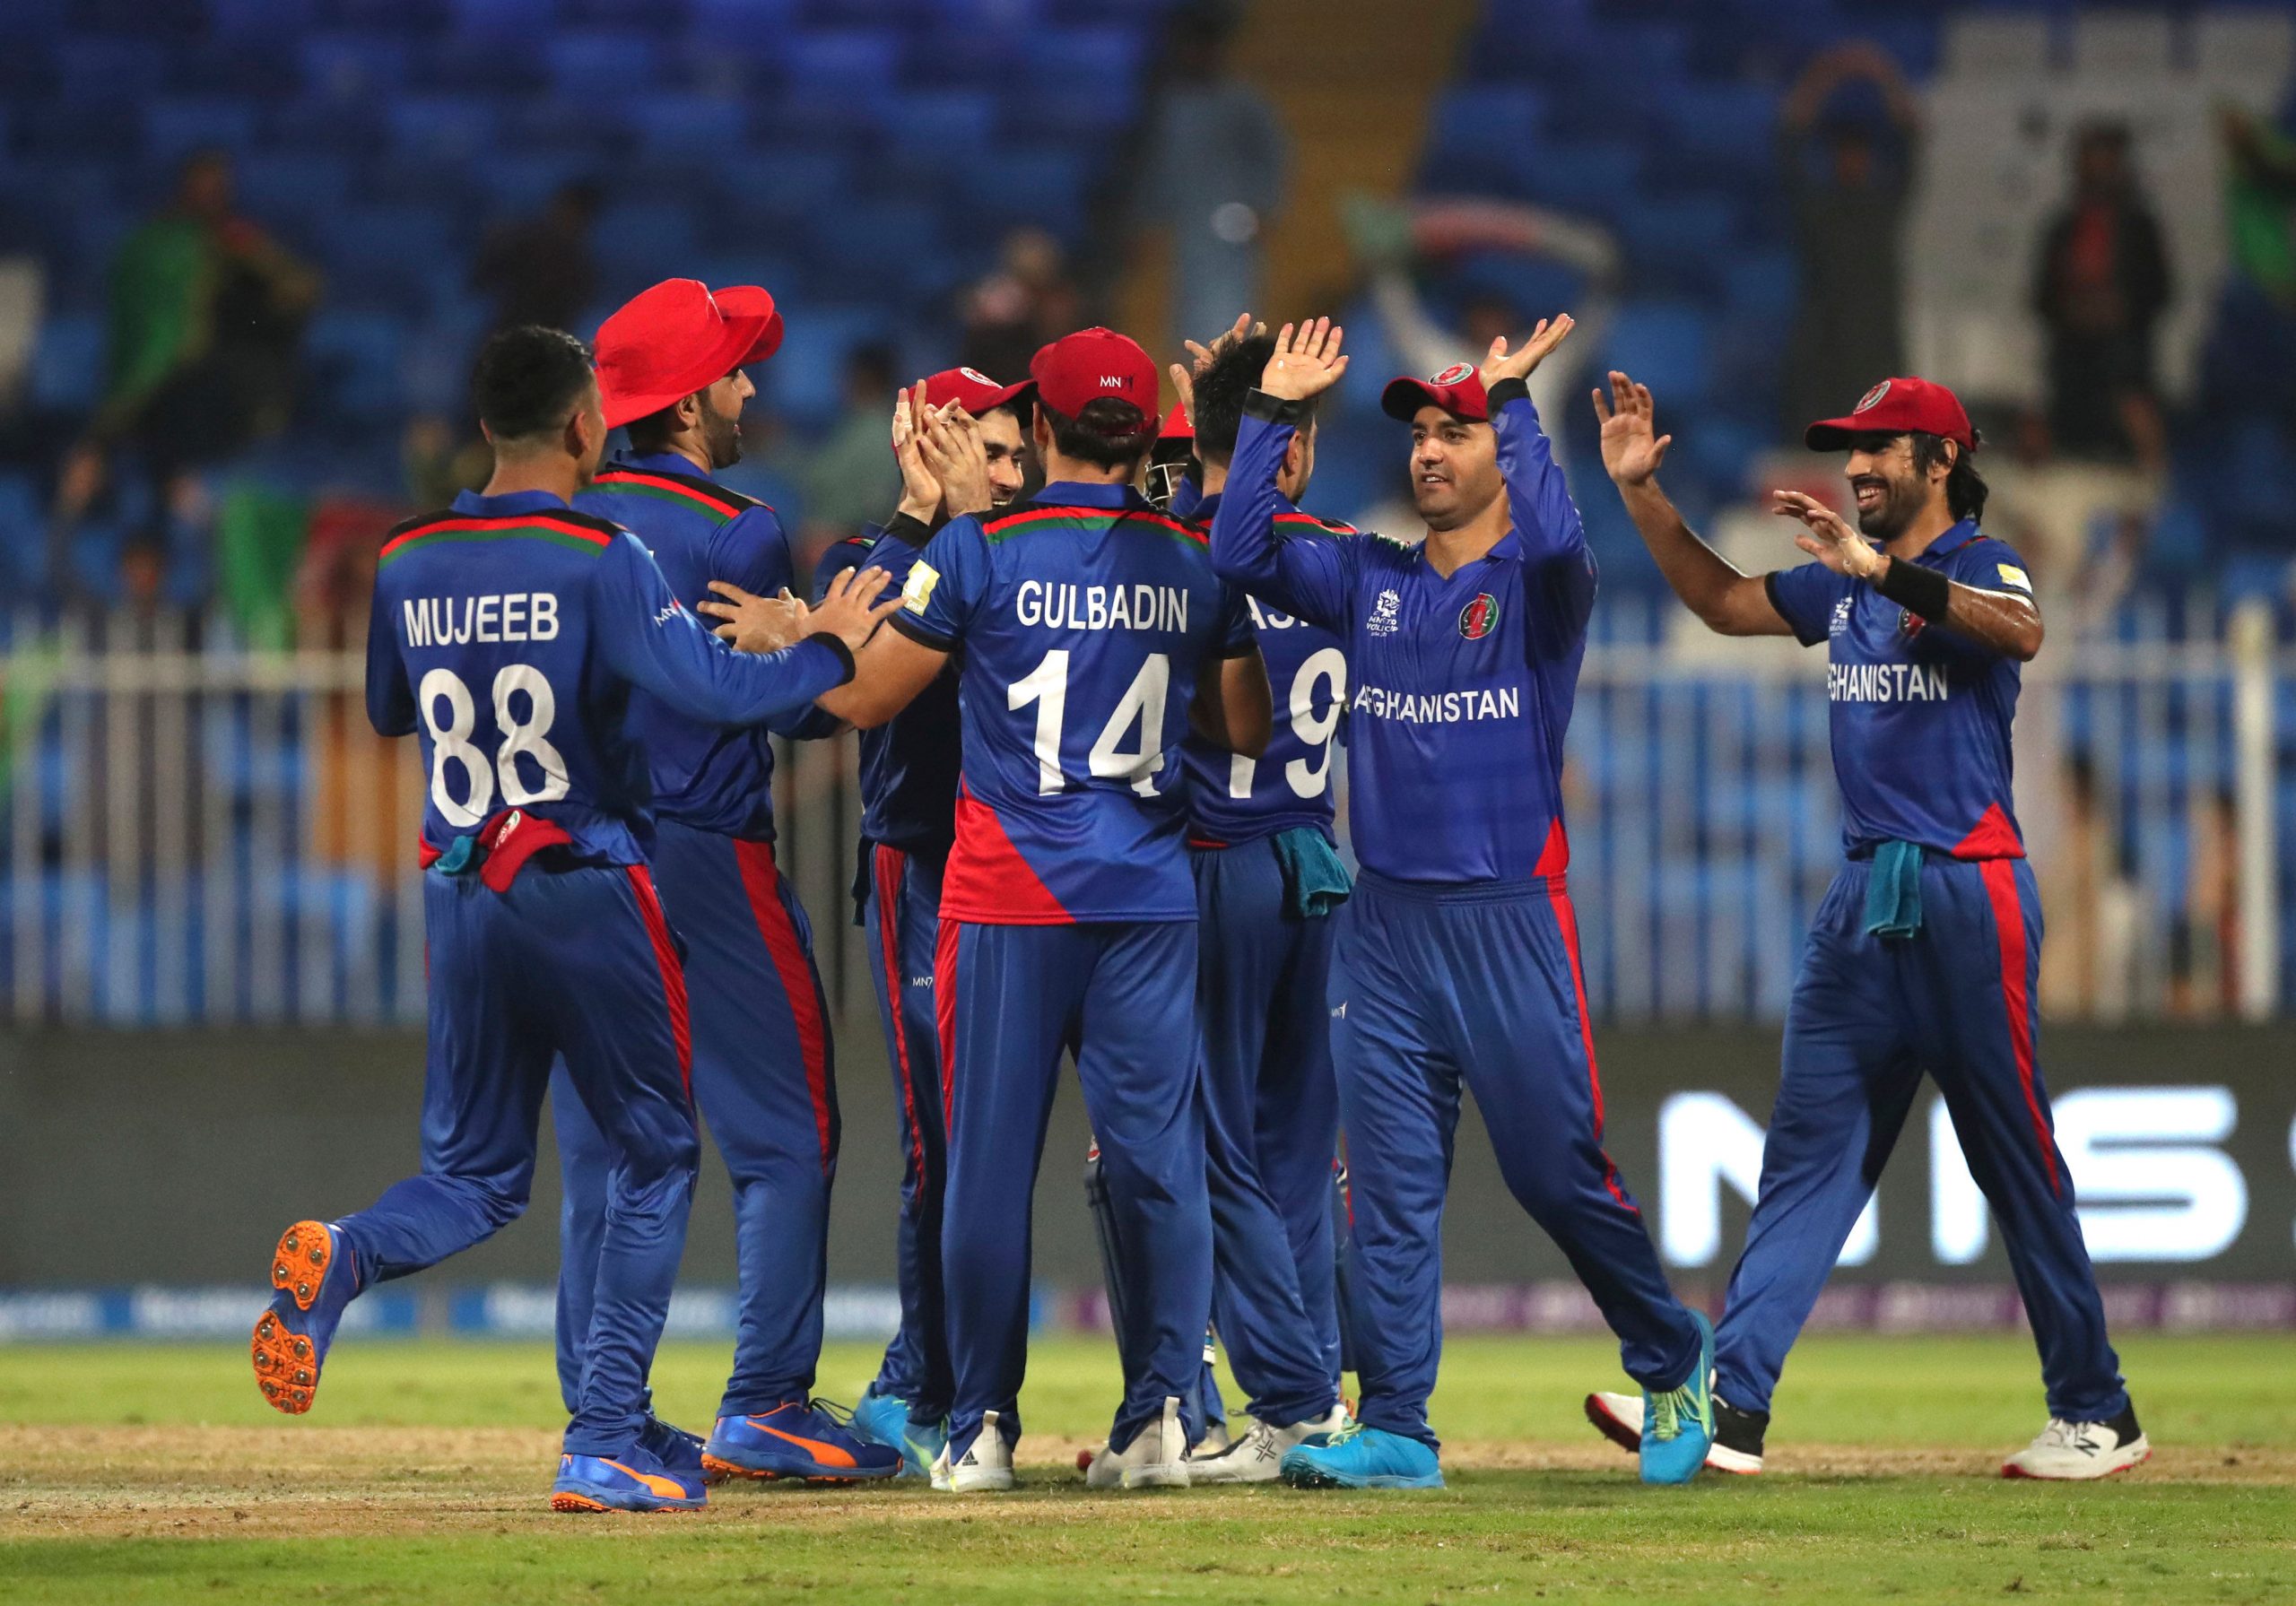 T20 World Cup: Mujeeb misses out; Afghanistan bats vs Namibia